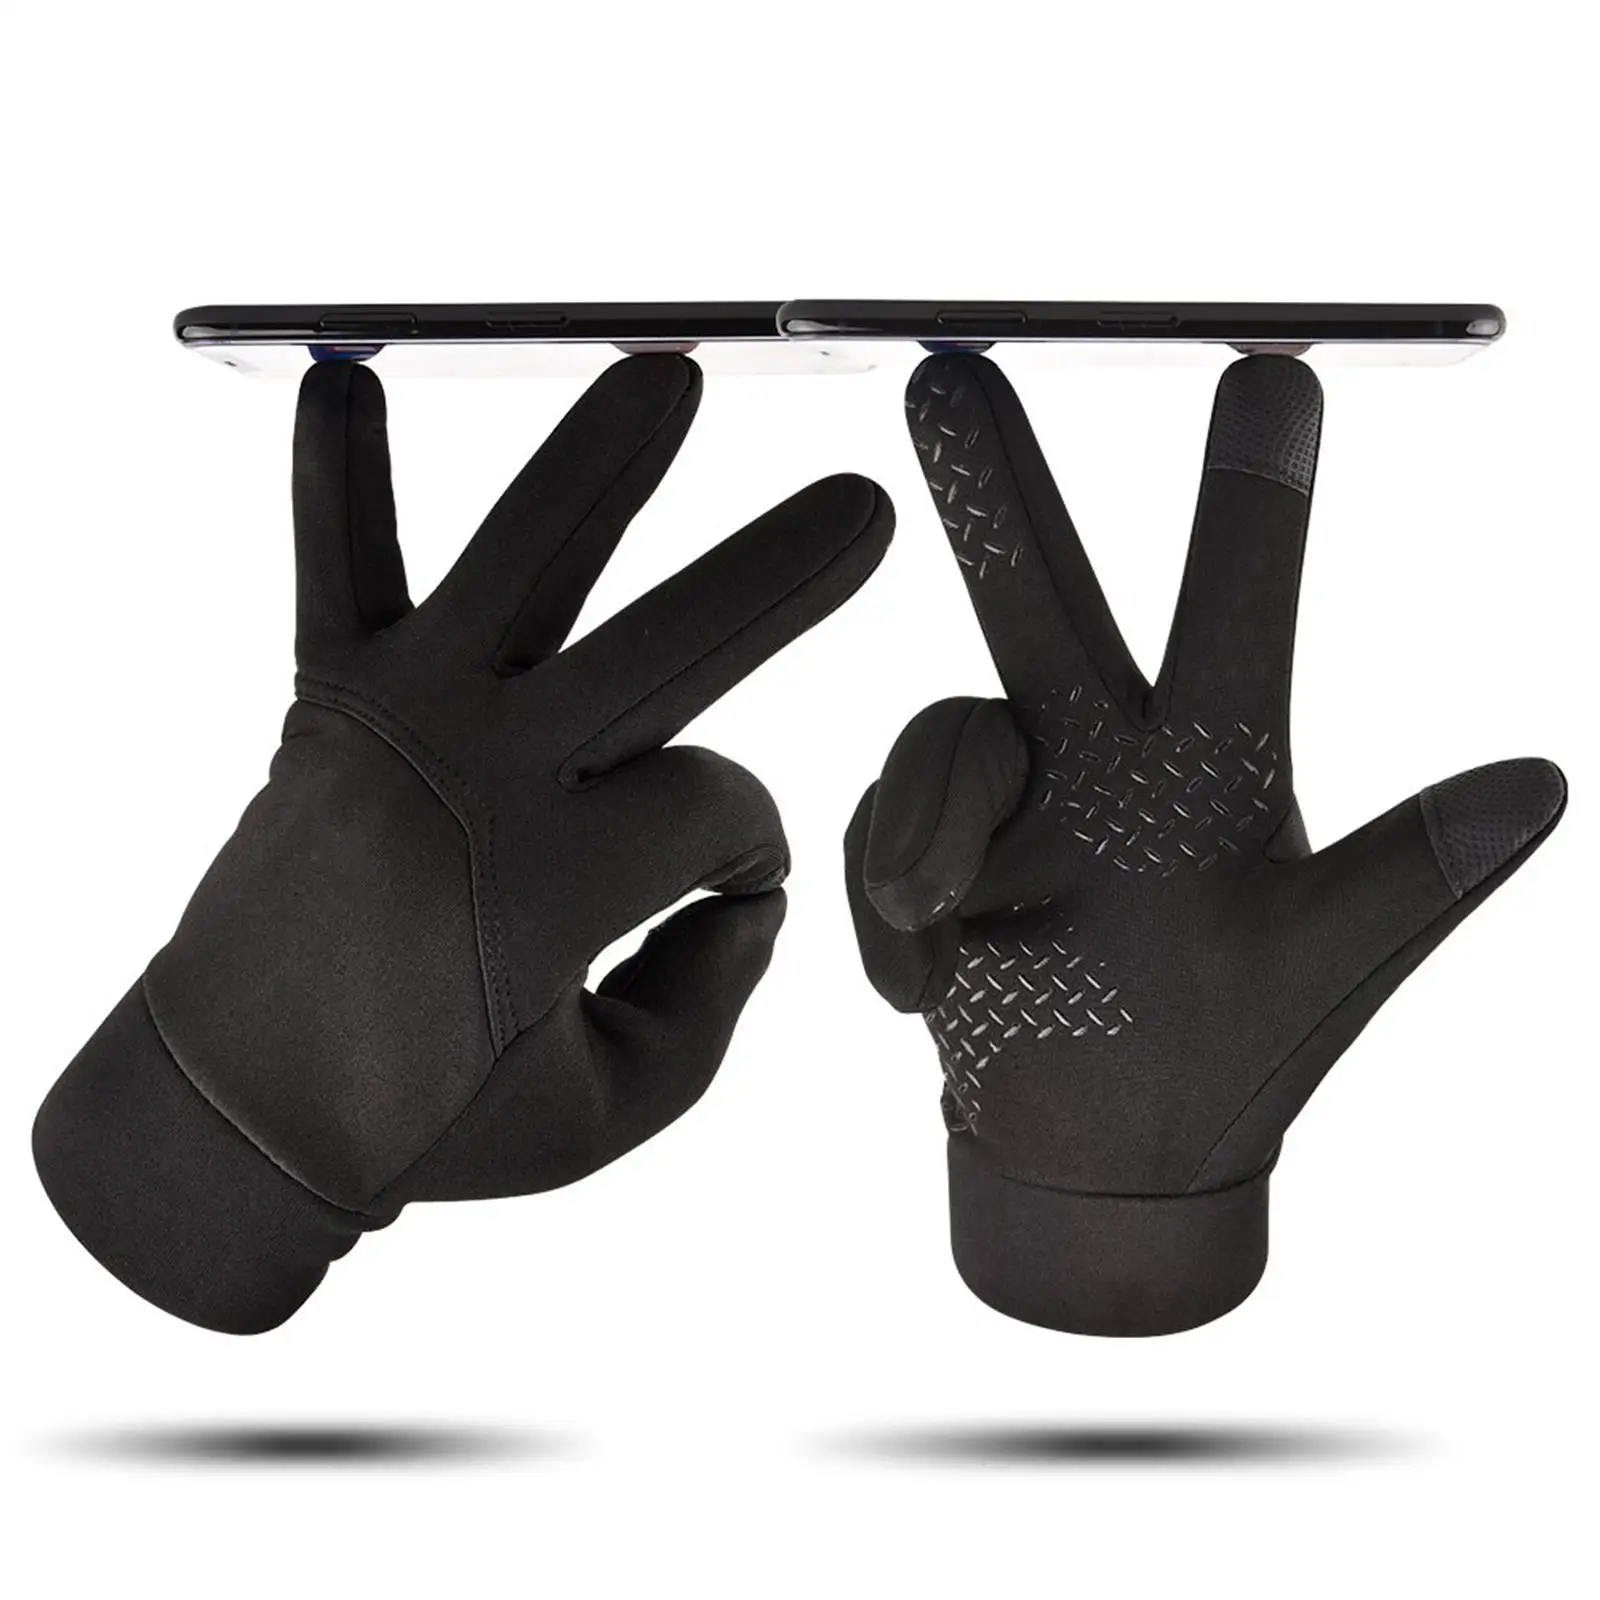 Waterproof Winter Gloves, Bicycle Sports Mittens ,Comfortable Full Finger Riding